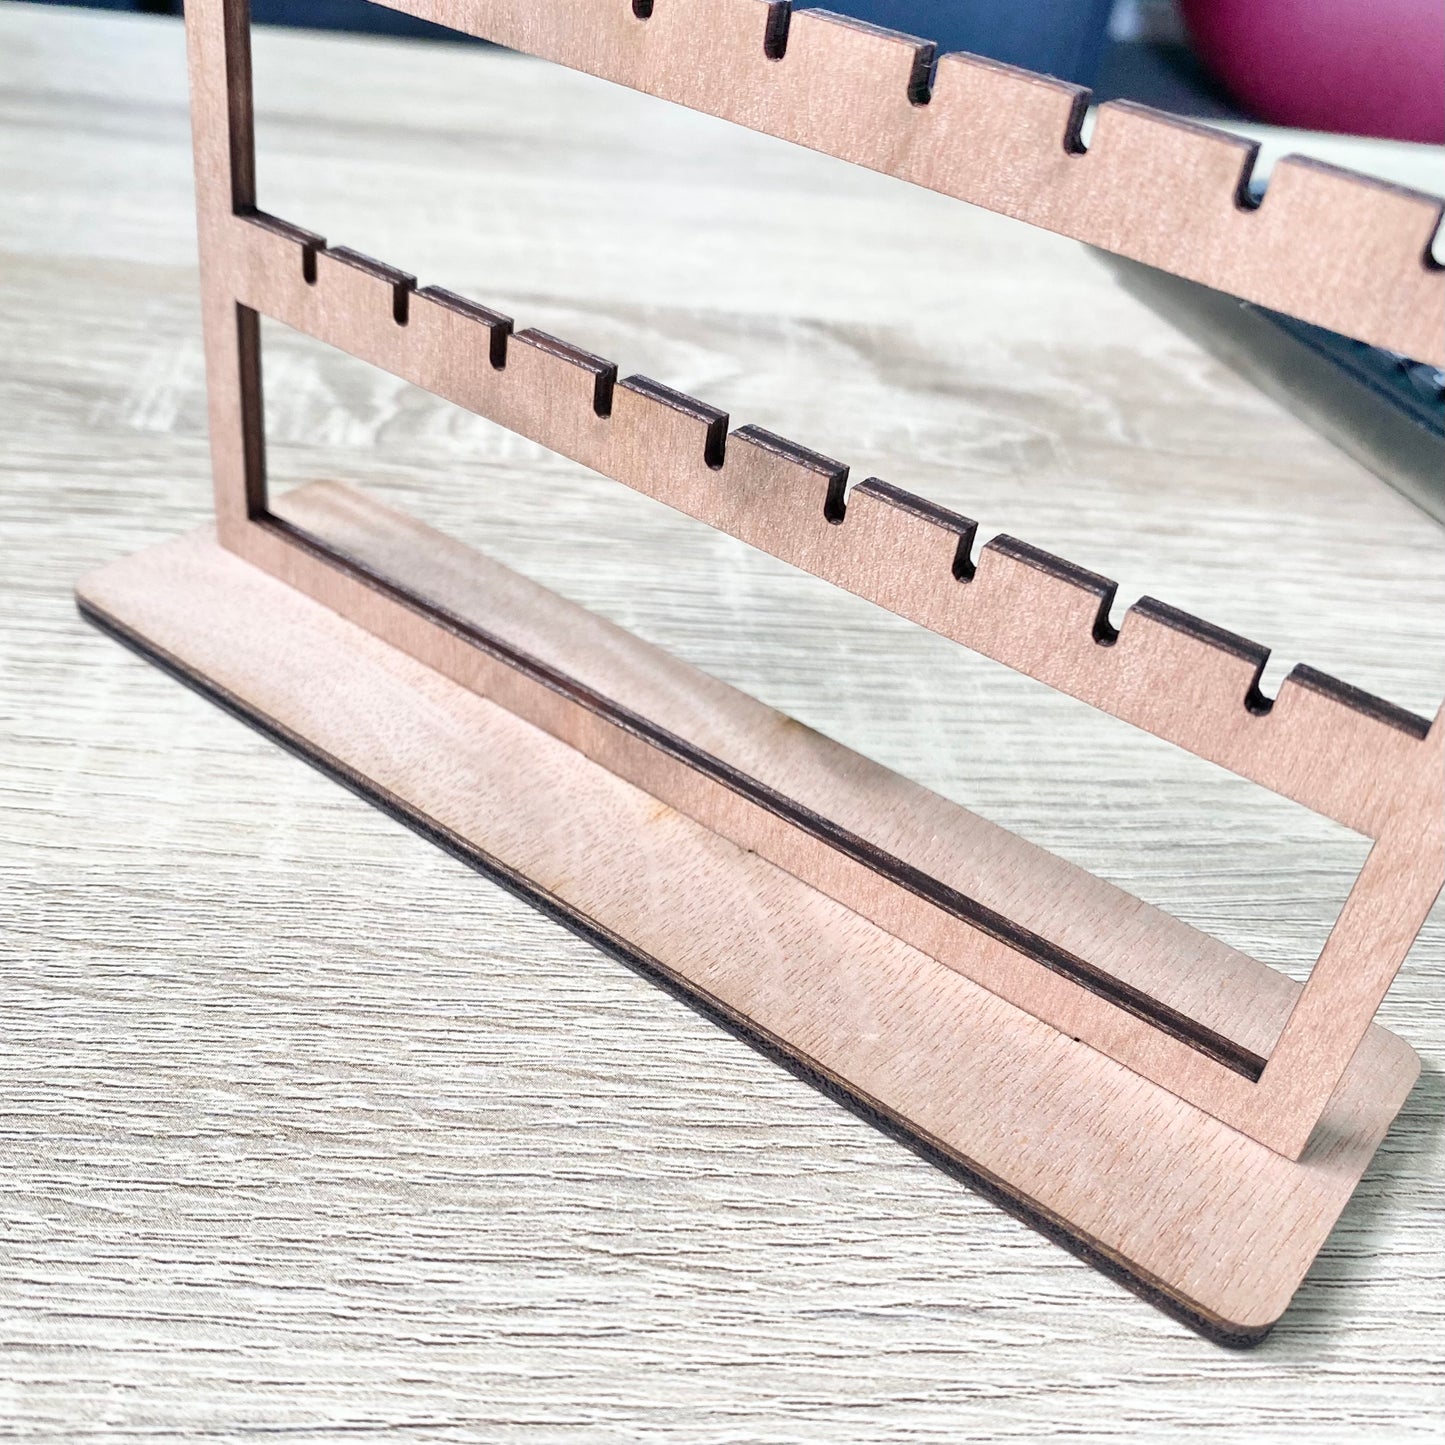 The Susan earring holder